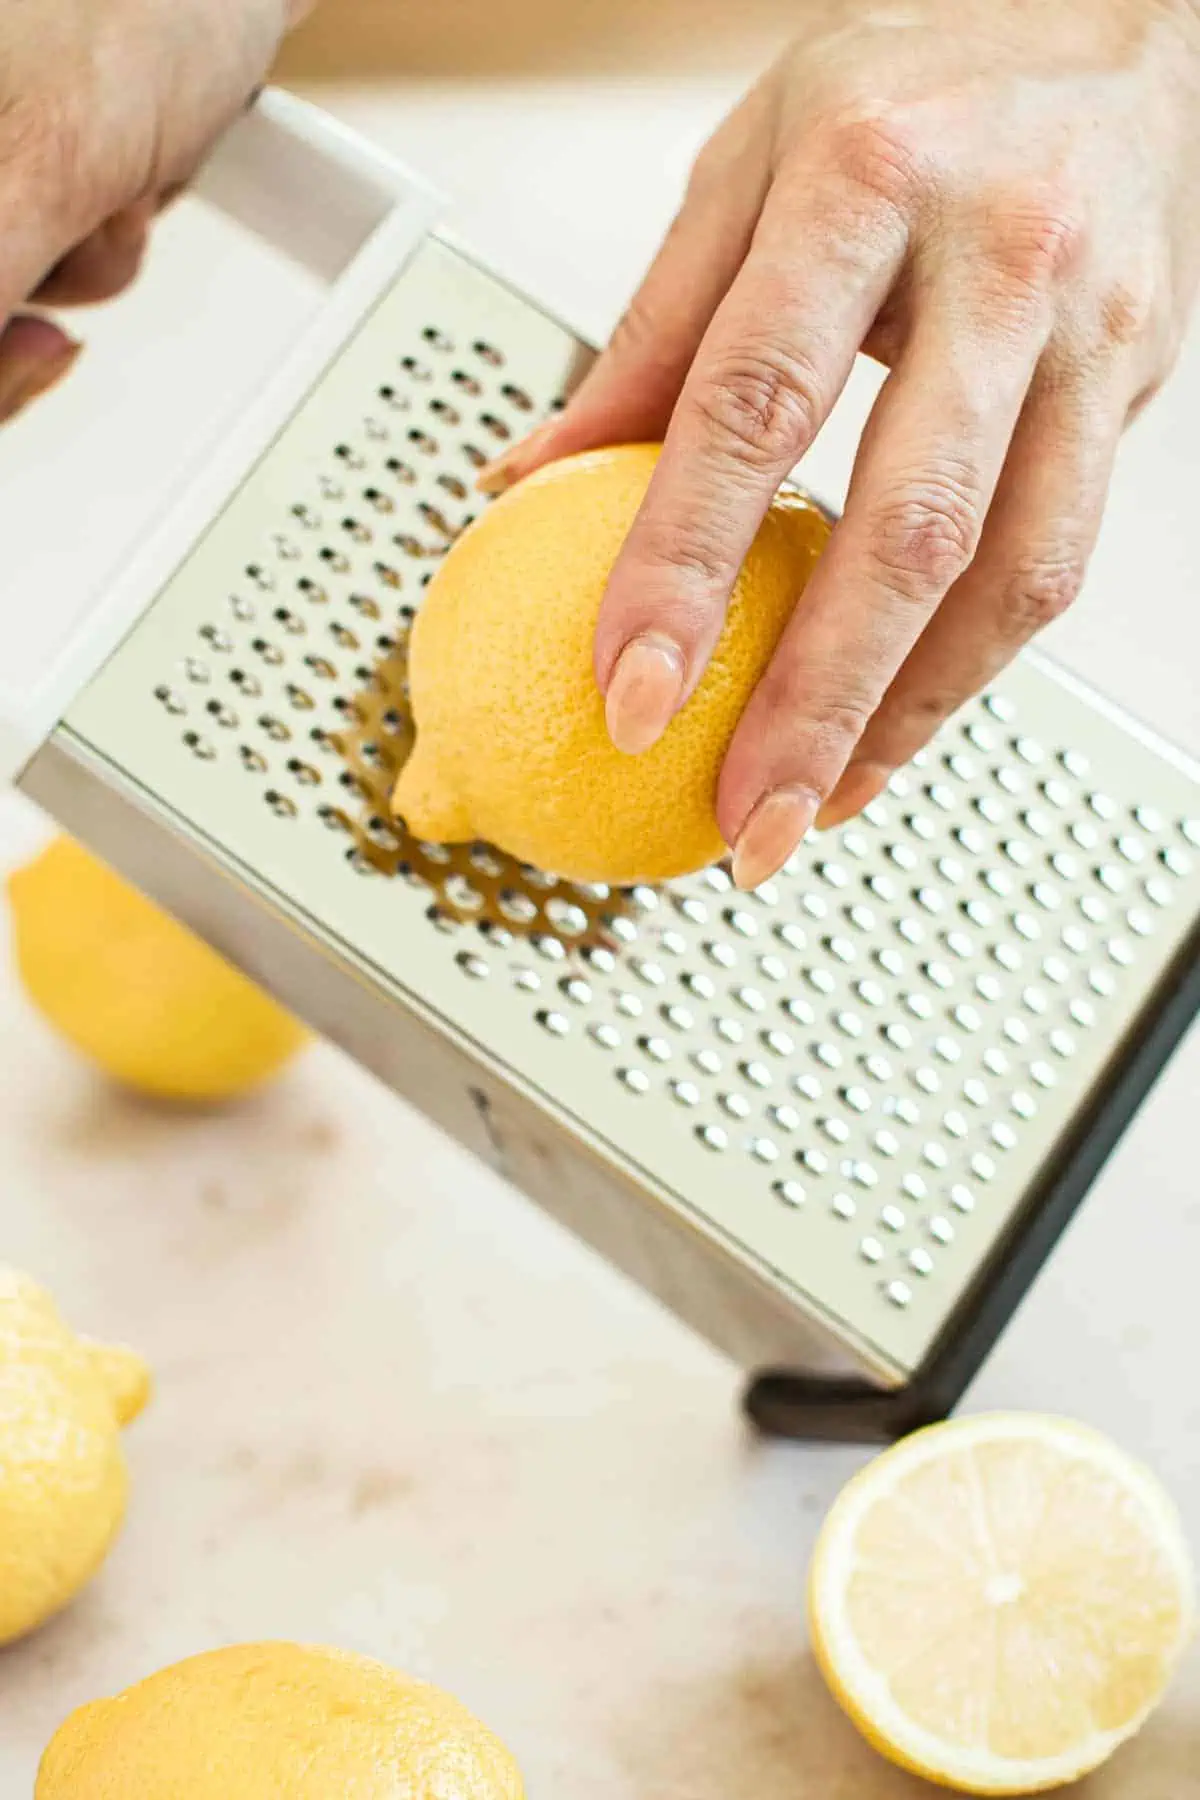 Using a cheese grater to zest a lemon.